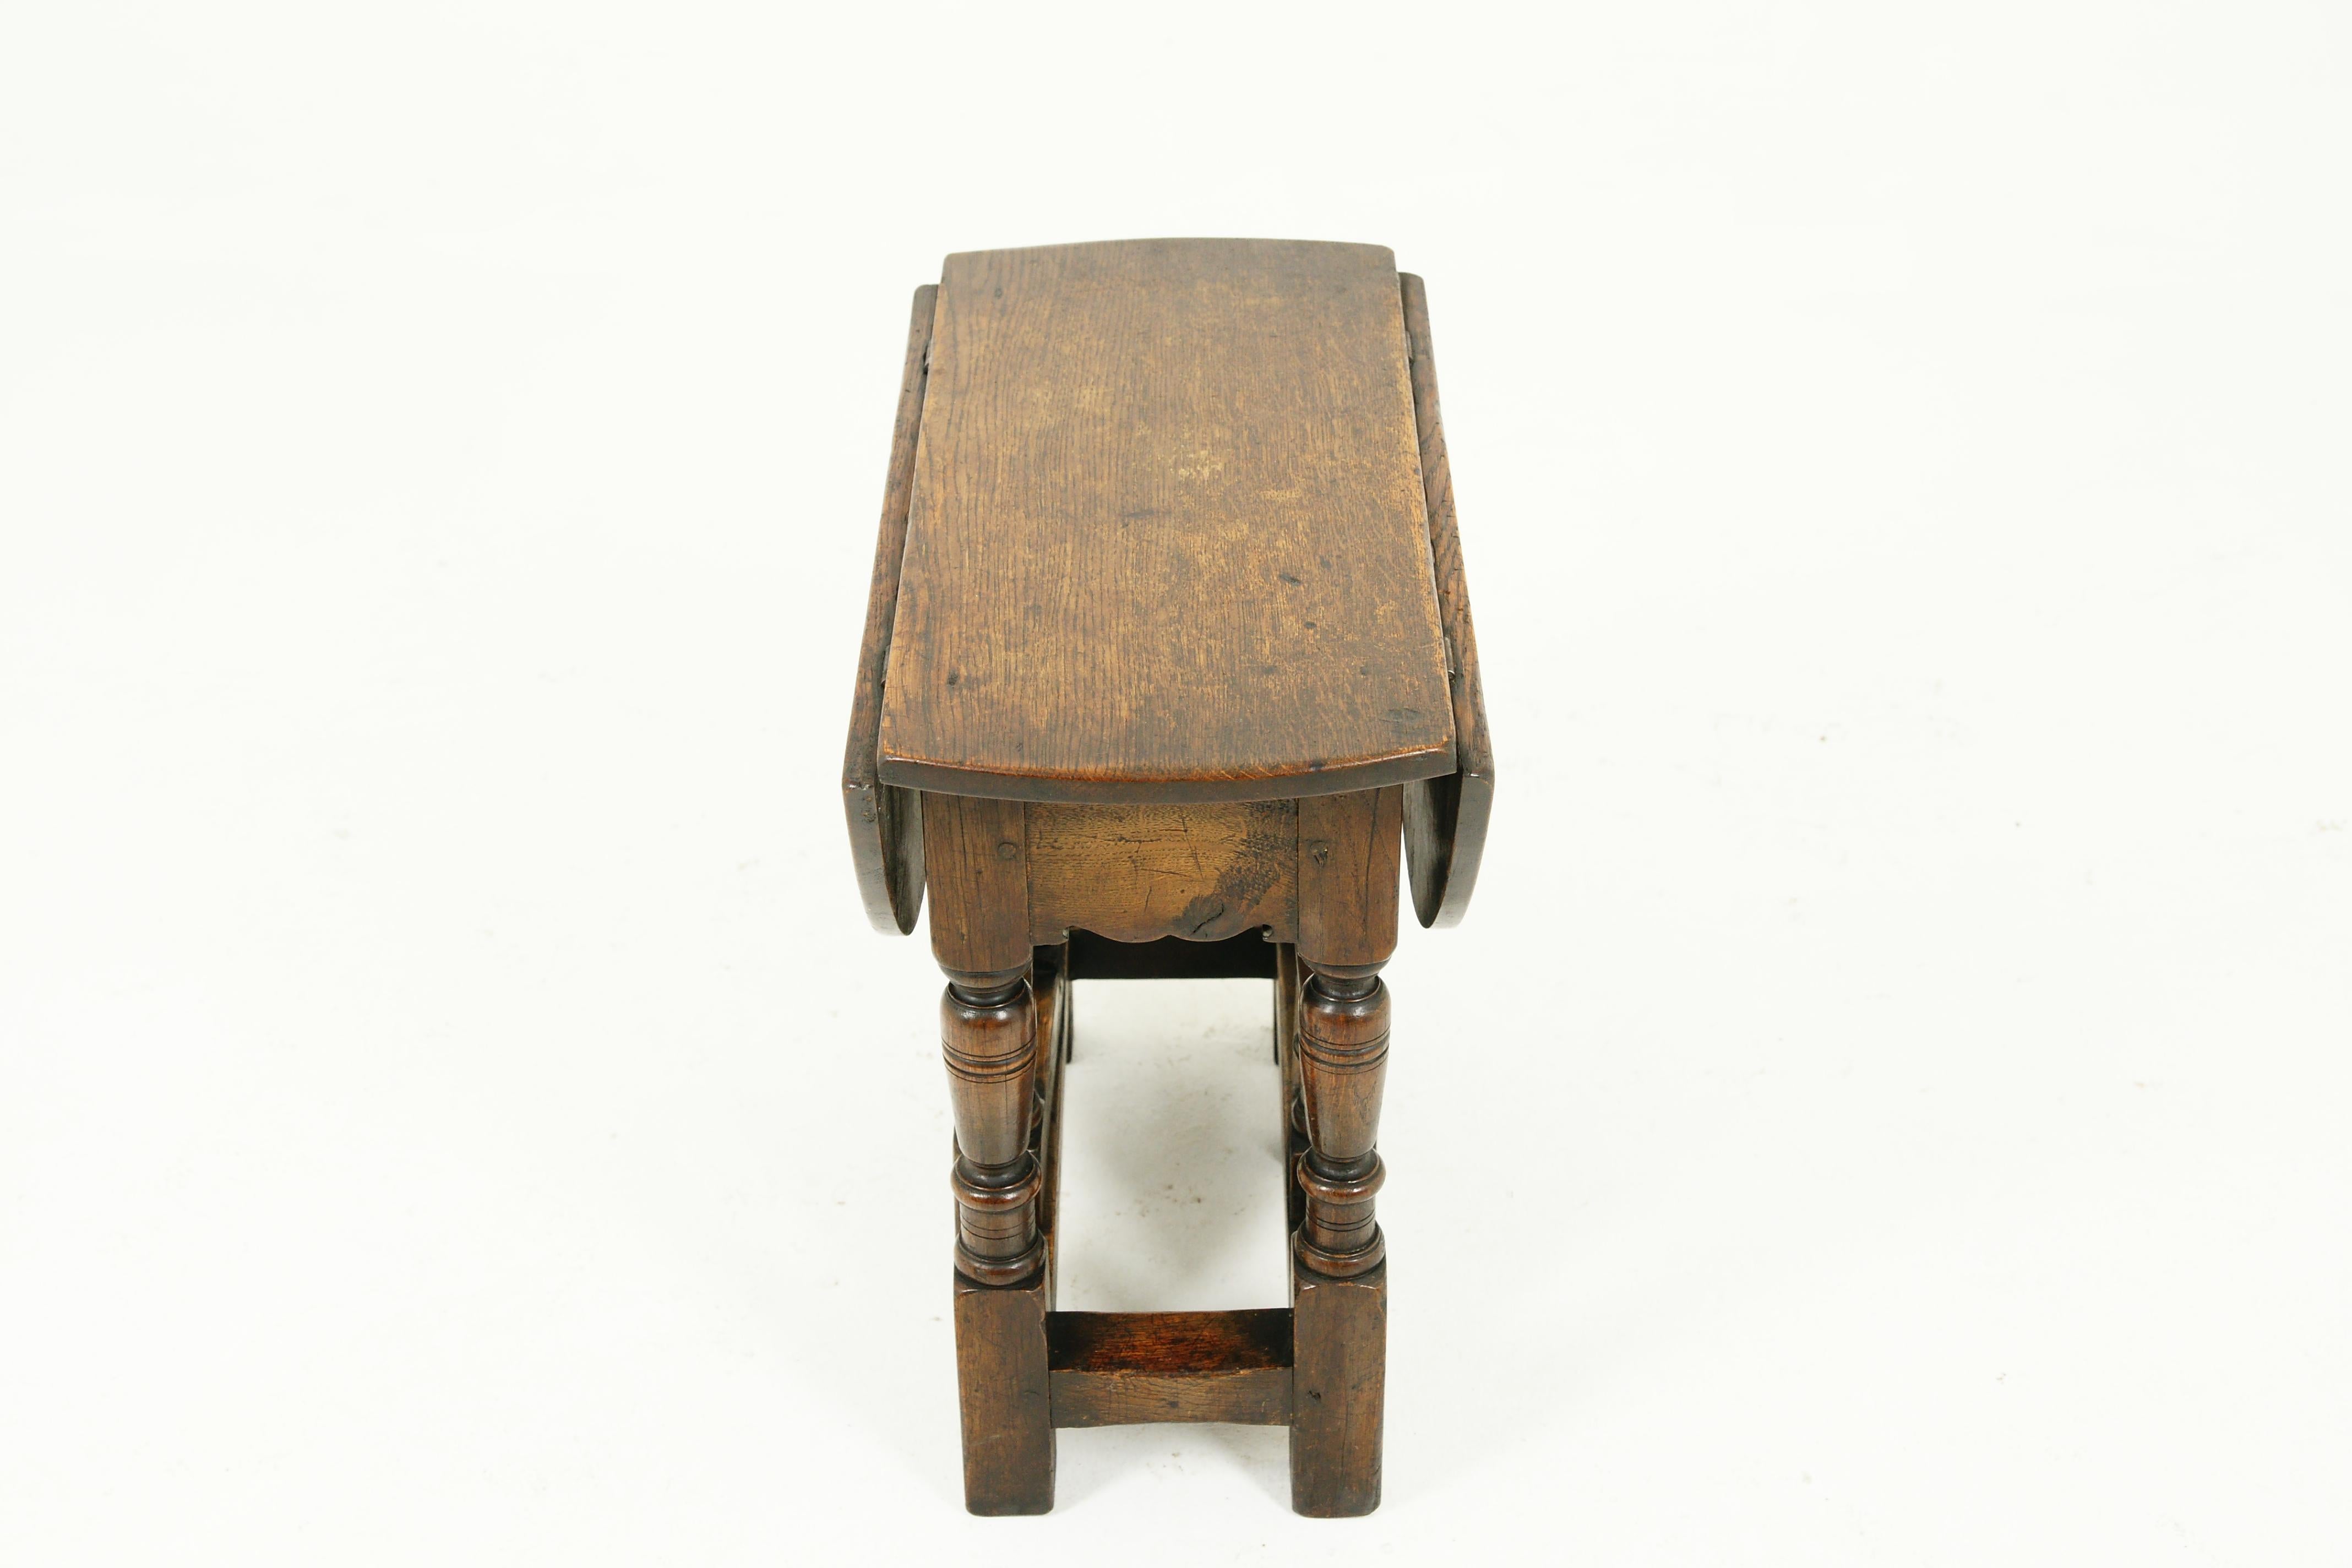 Hand-Crafted Small Antique Gateleg Table, Oak Drop Leaf Table, Scotland 1920, B2389